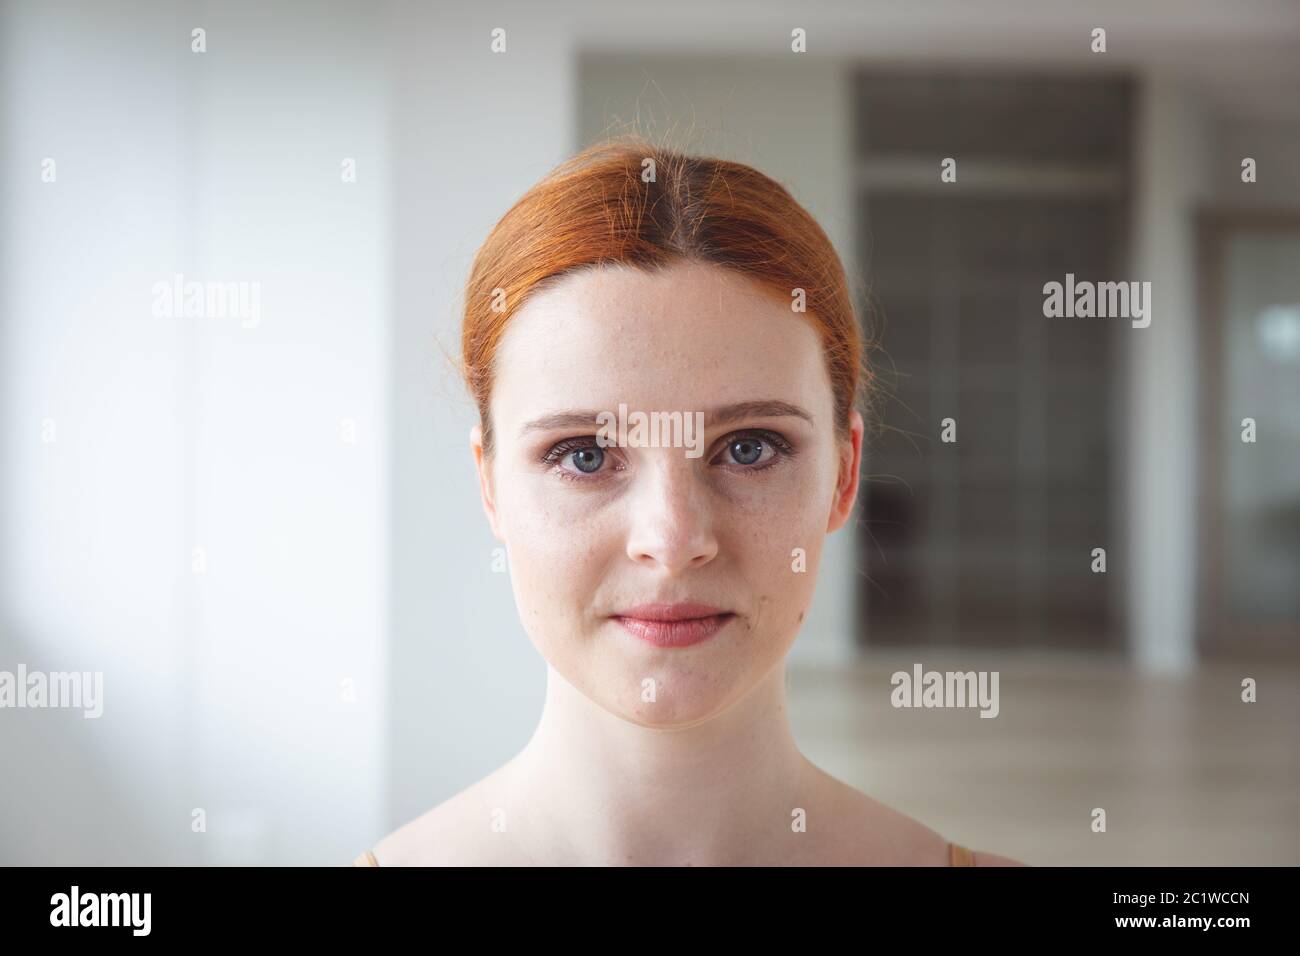 Caucasian female ballet dancer staring into the camera with a serious face Stock Photo